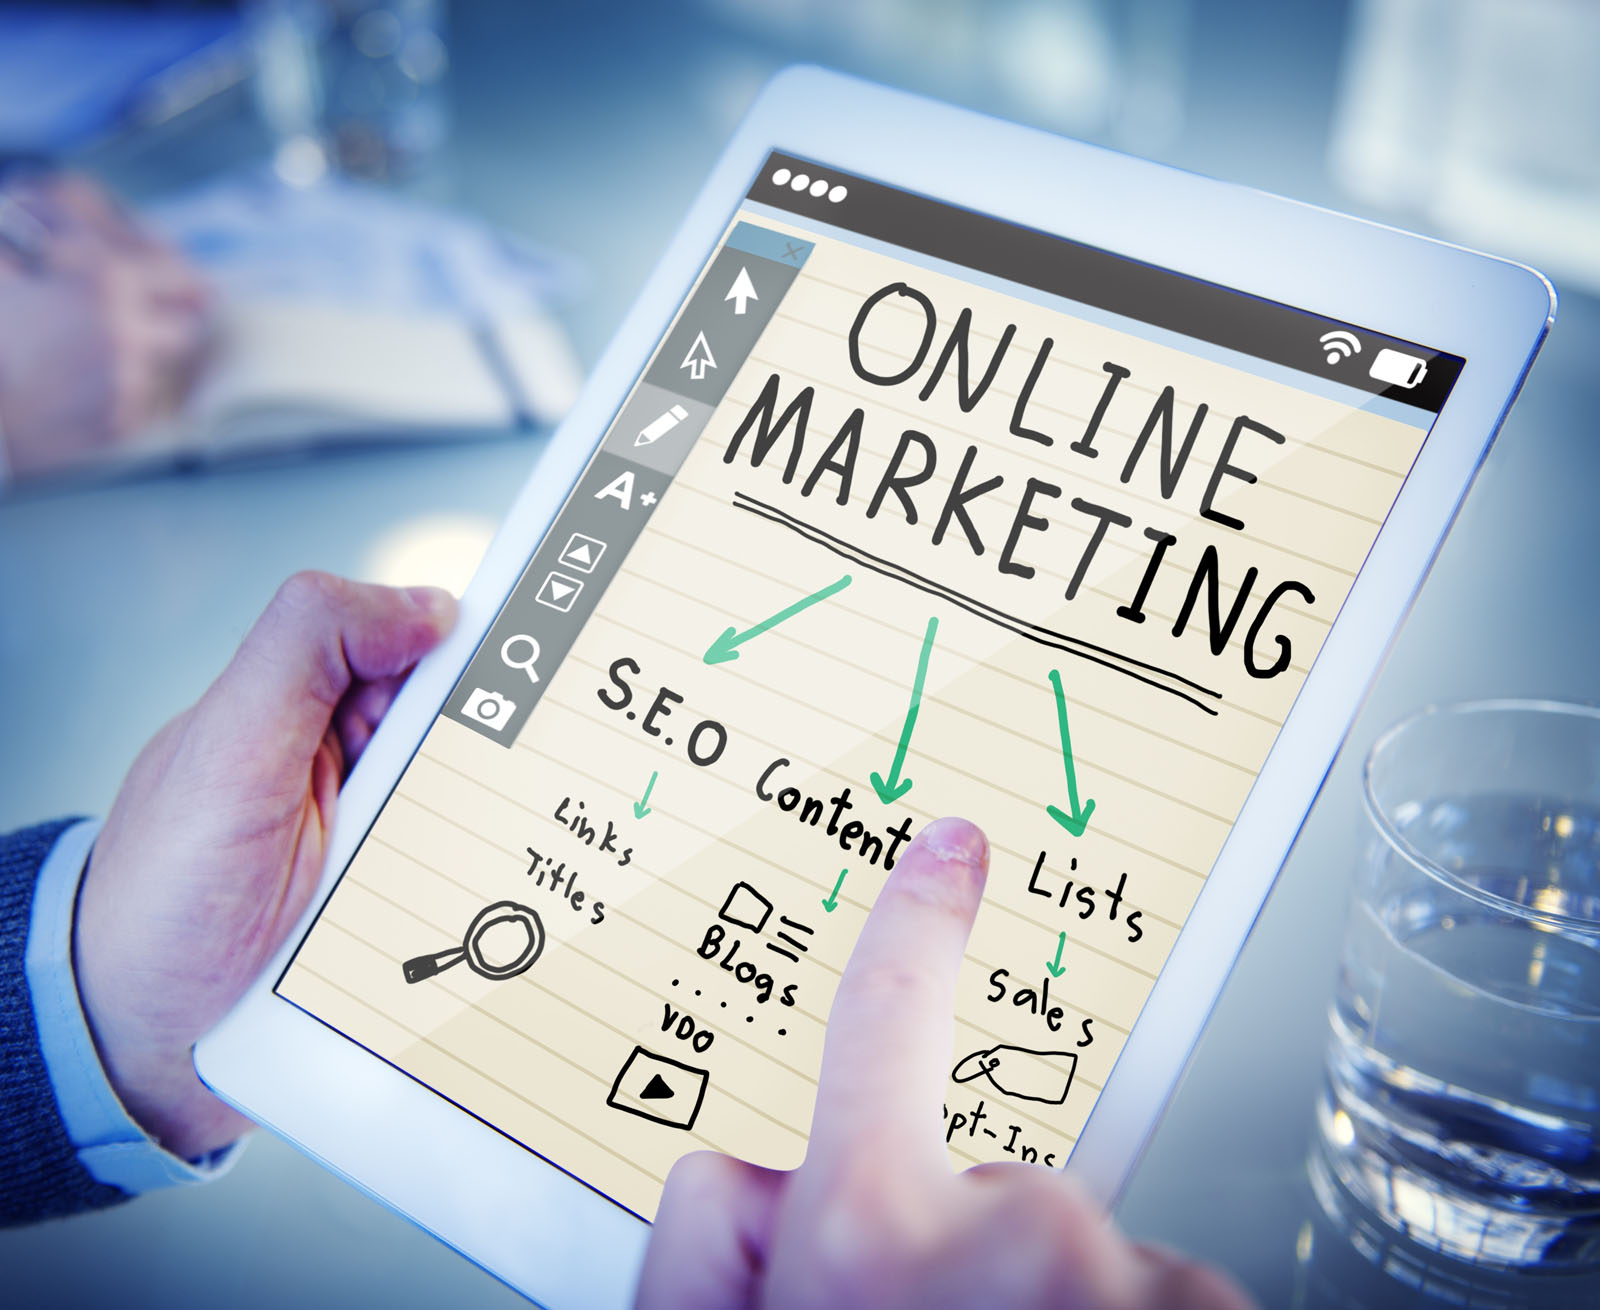 10 Internet Marketing Tips to Make your Business More Successful